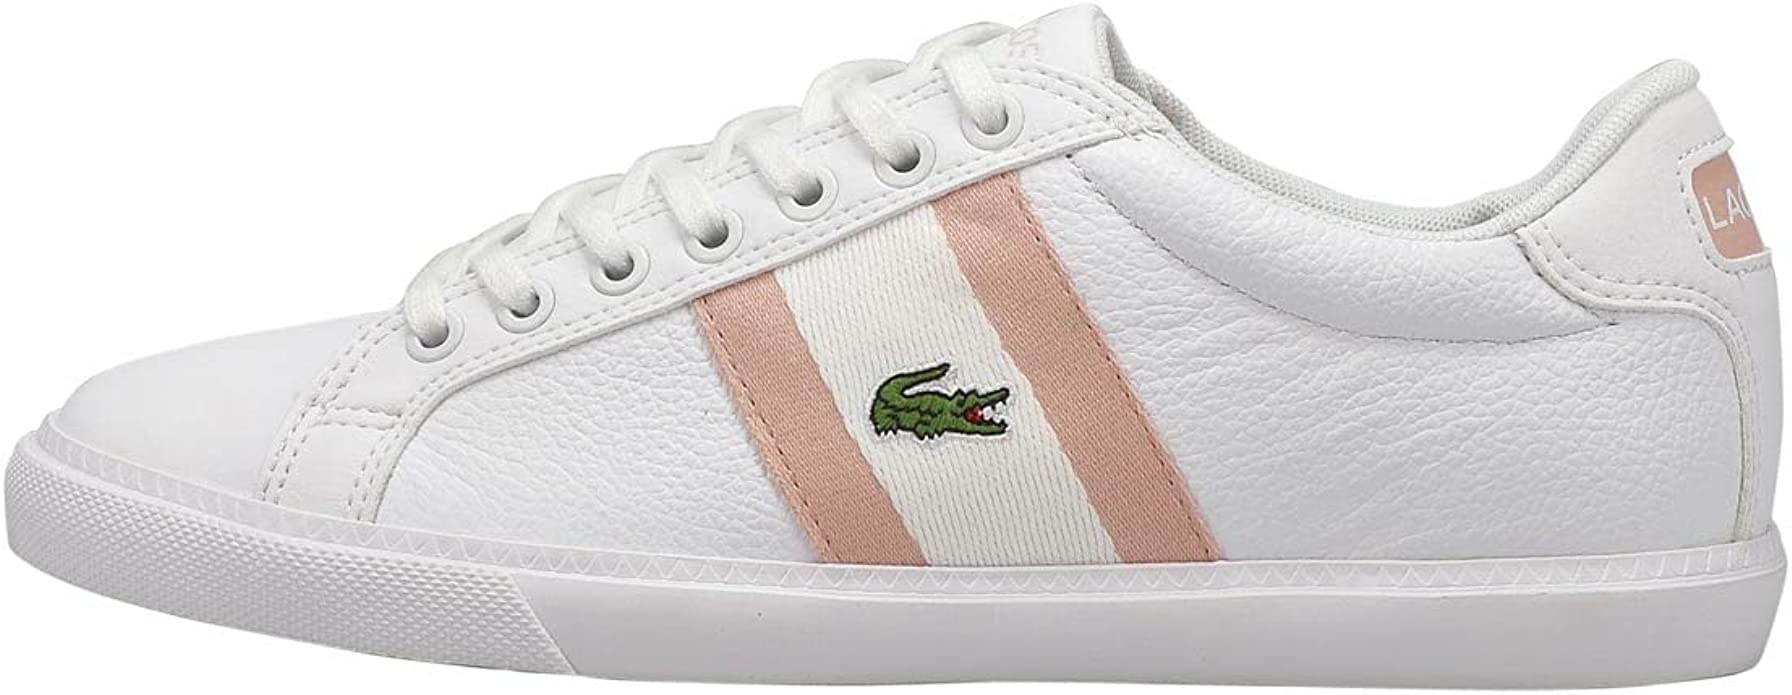 Preppy Aesthetic Sneakers by Lacoste White Leather with Pastel Pink Stripes and Alligator Logo